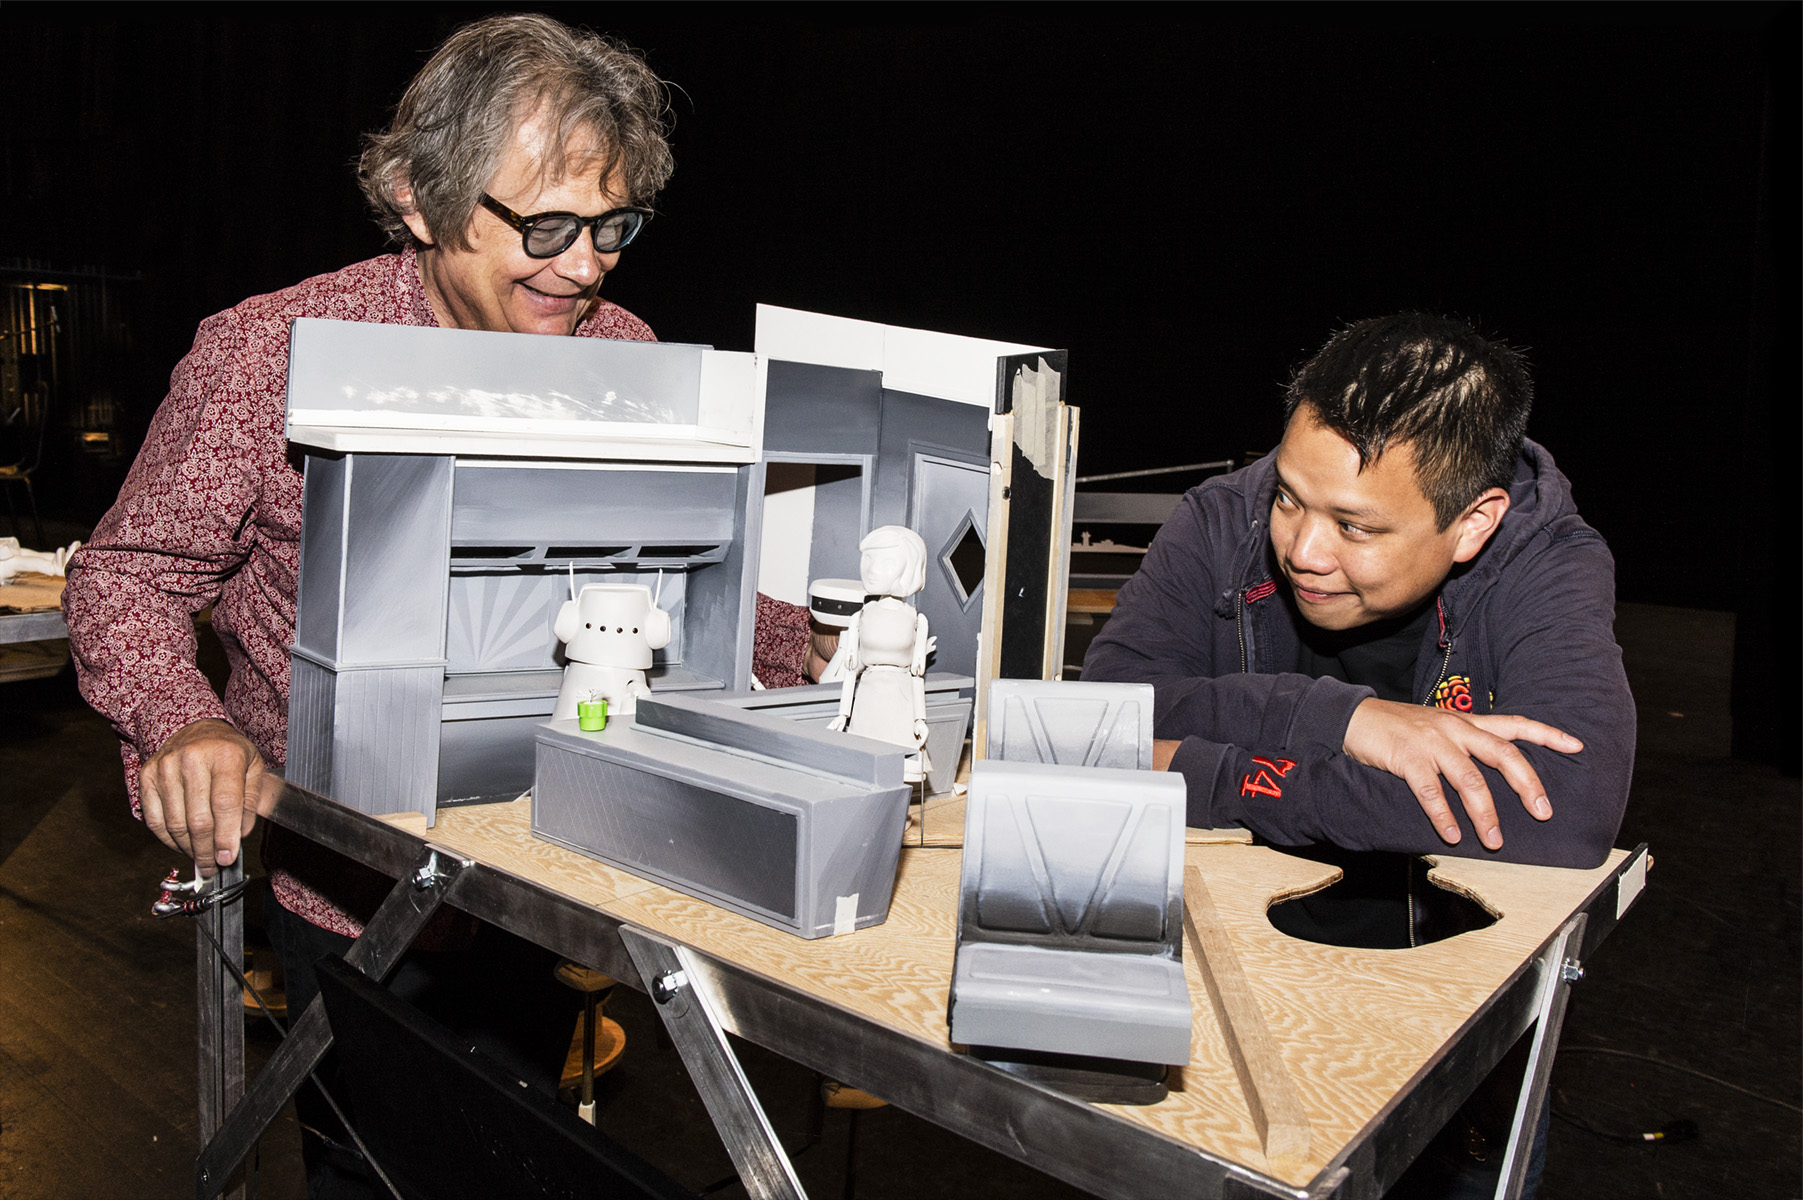 Kid Koala (right) with part of his project "Nufonia Must Fall"